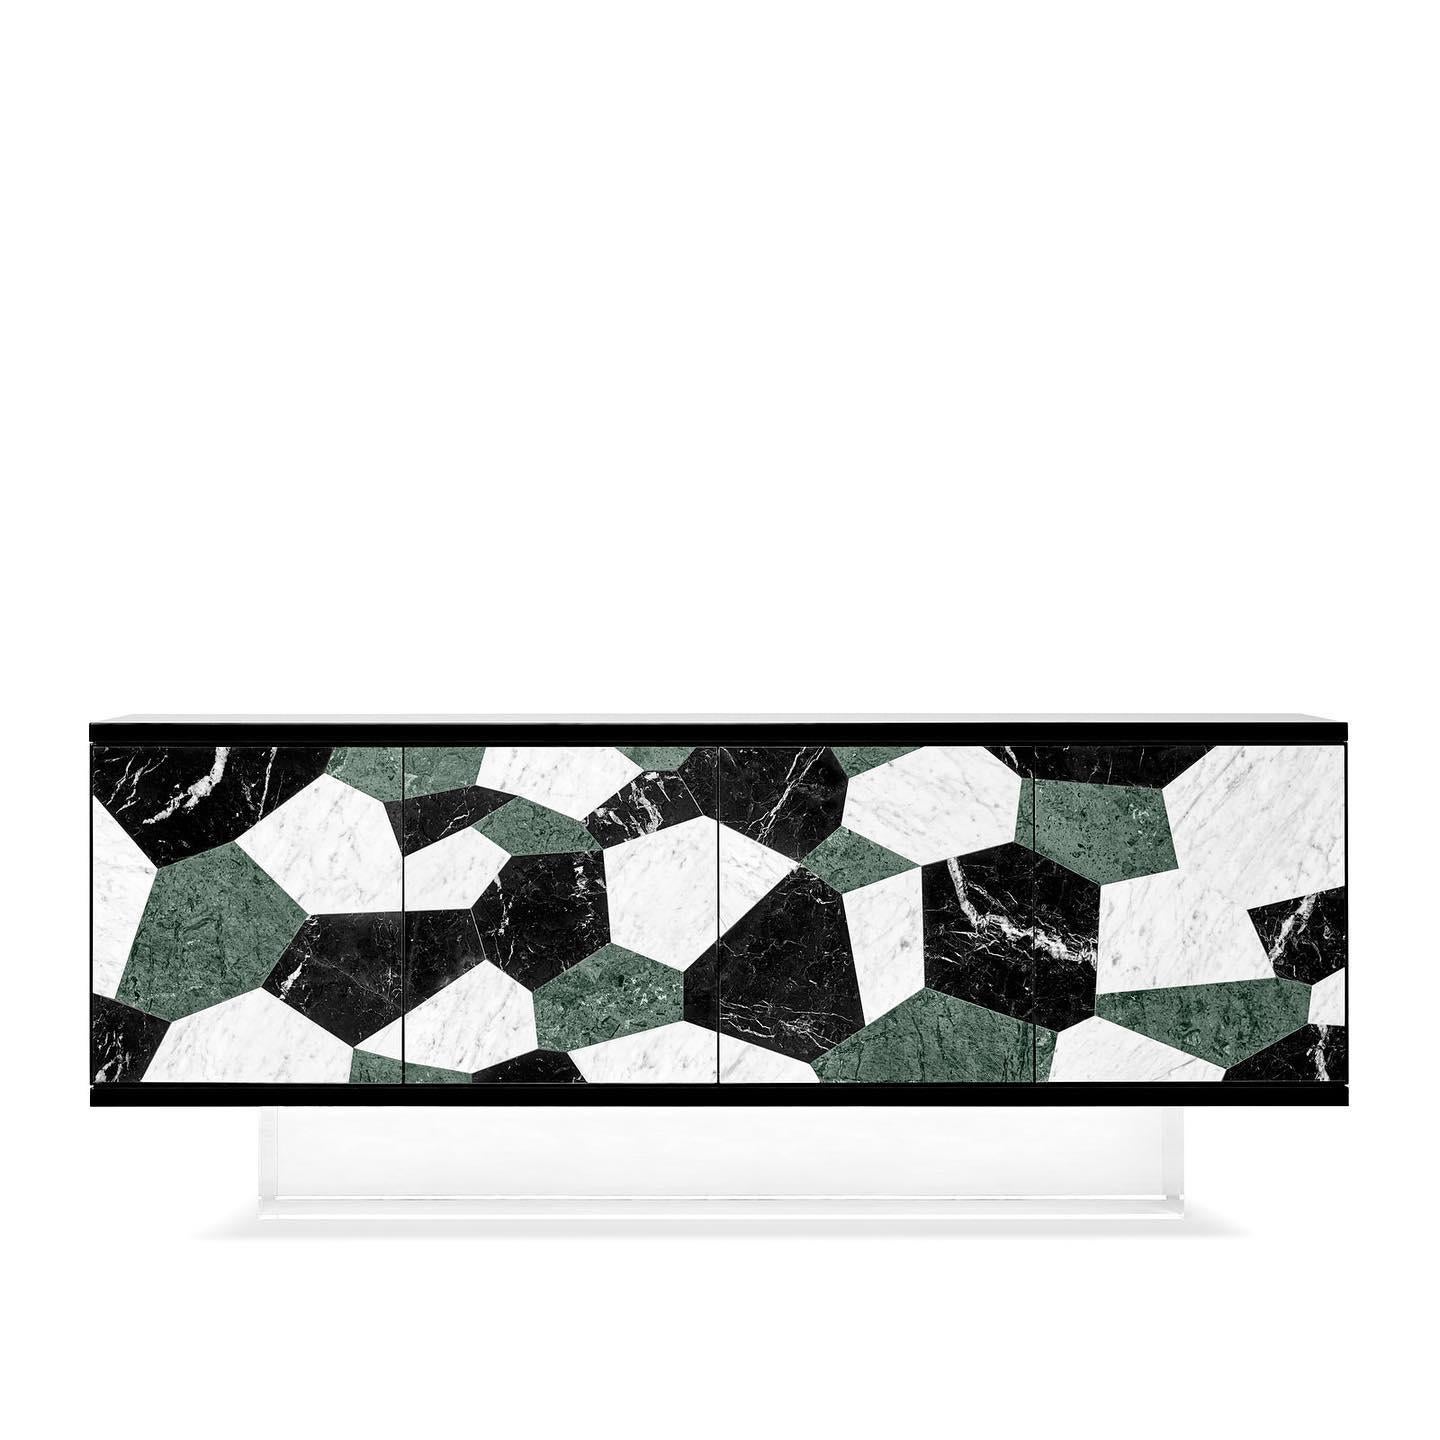 This sideboard has a singular kaleidoscopic marble pattern. The inlaying technique availed translates the visual pattern of a fractal, found in Nature, science and in human creation. The sideboard has four compartments, each with a sliding drawer